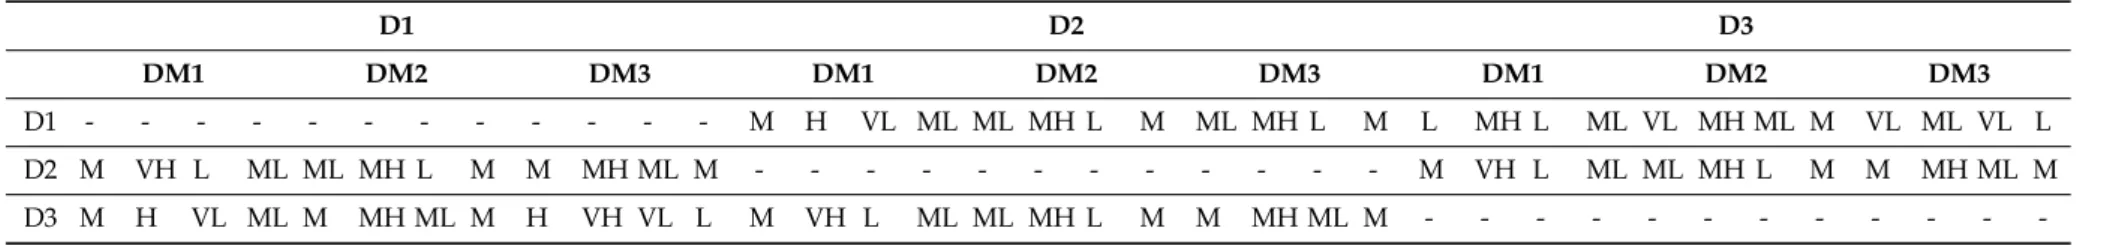 Table 3. Input data for the dimensions. D1 D2 D3 DM1 DM2 DM3 DM1 DM2 DM3 DM1 DM2 DM3 D1 - - - - - - - - - - - - M H VL ML ML MH L M ML MH L M L MH L ML VL MH ML M VL ML VL L D2 M VH L ML ML MH L M M MH ML M - - - - - - - - - - - - M VH L ML ML MH L M M MH 